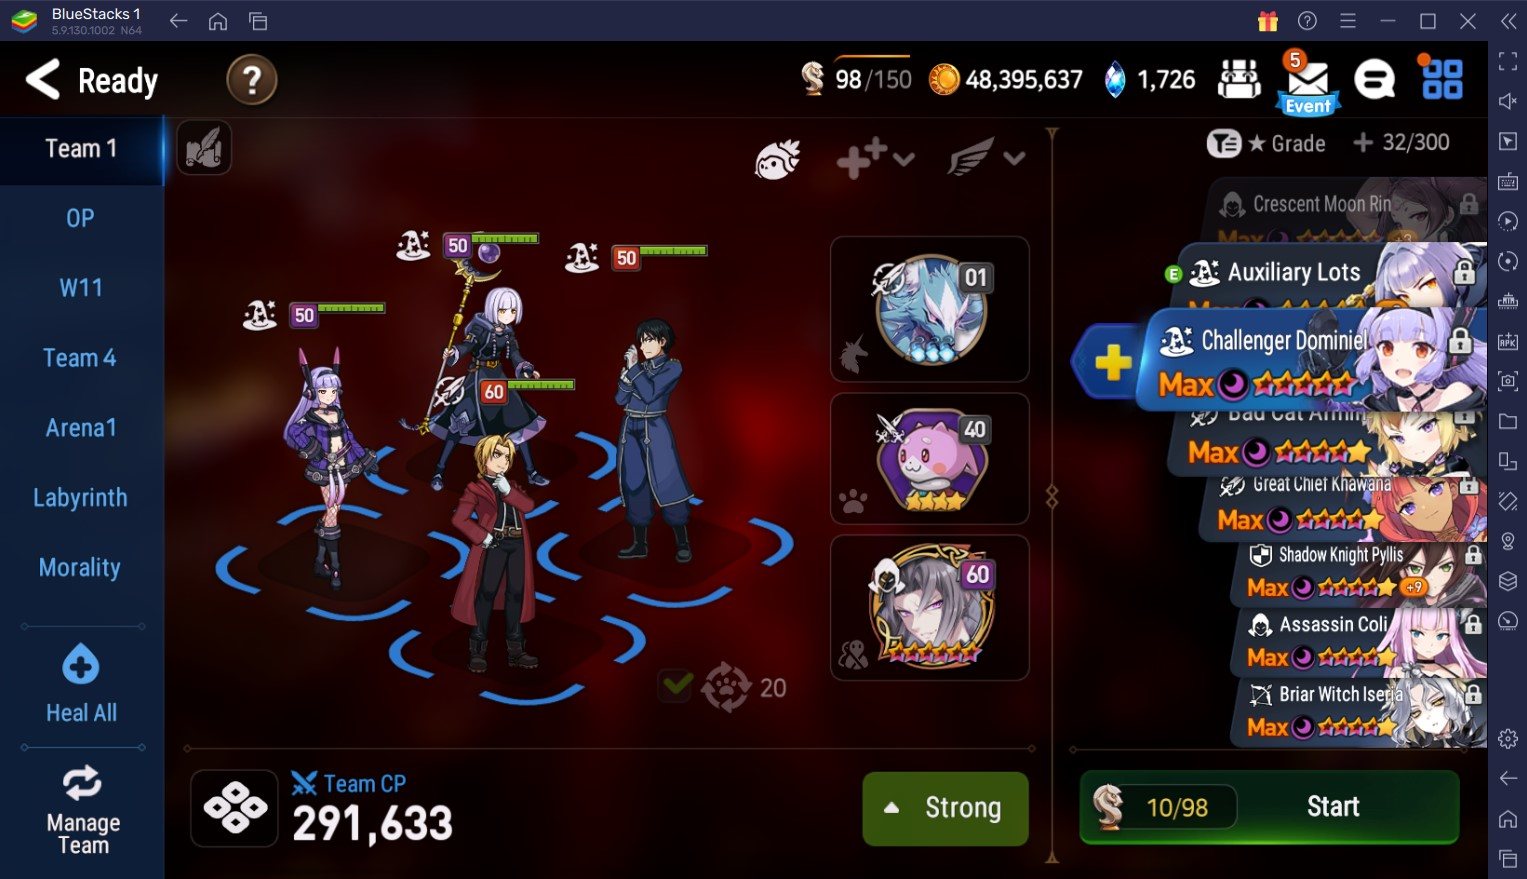 Epic Seven Roy Mustang Hero Guide – Abilities, Builds, Team Recommendations and More